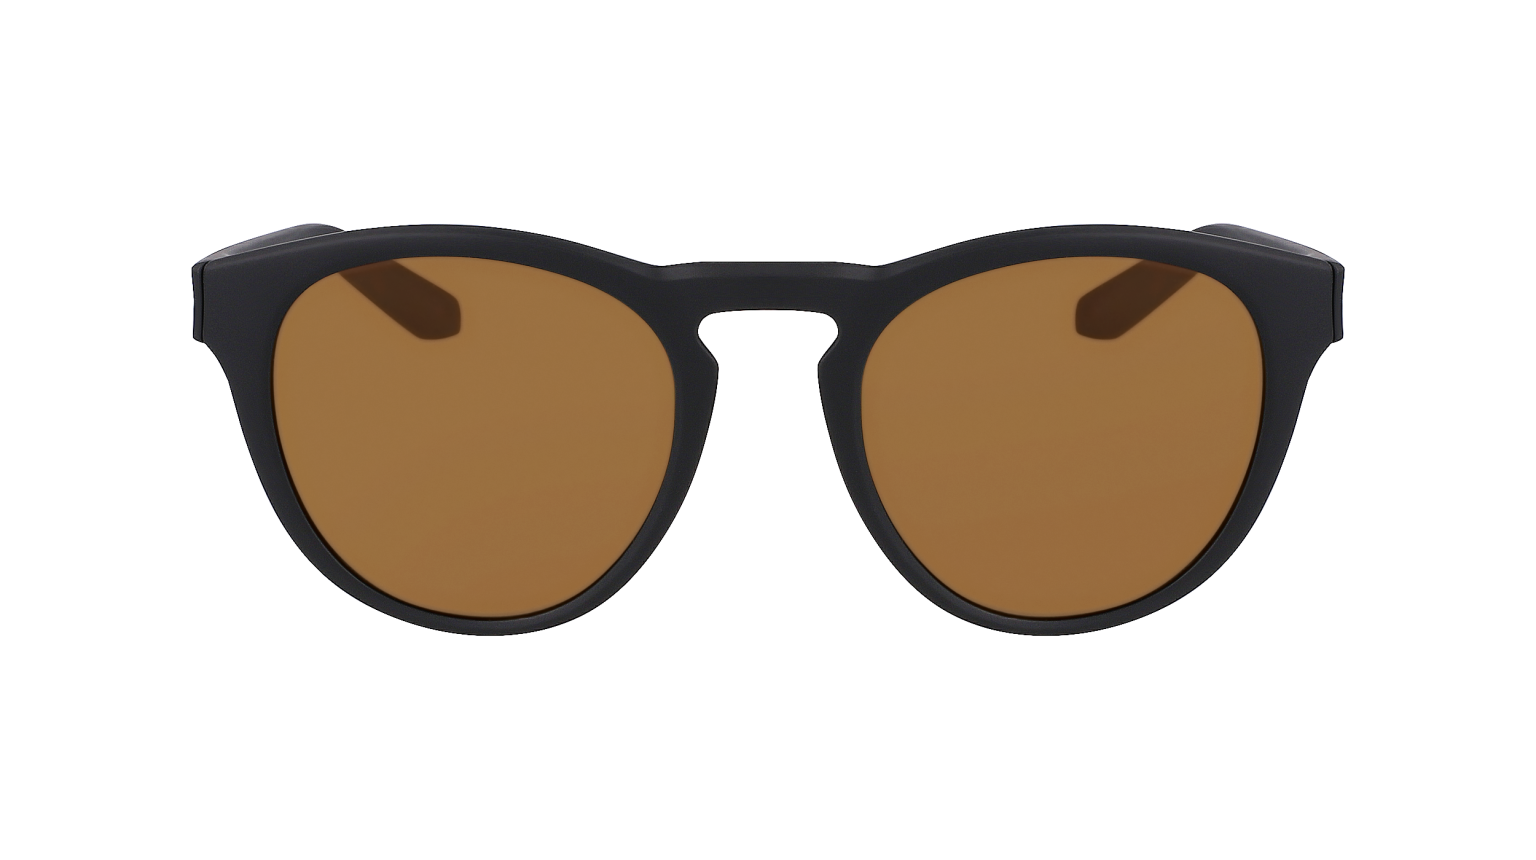 OPUS - Matte Black with Lumalens Copper Ionized Lens